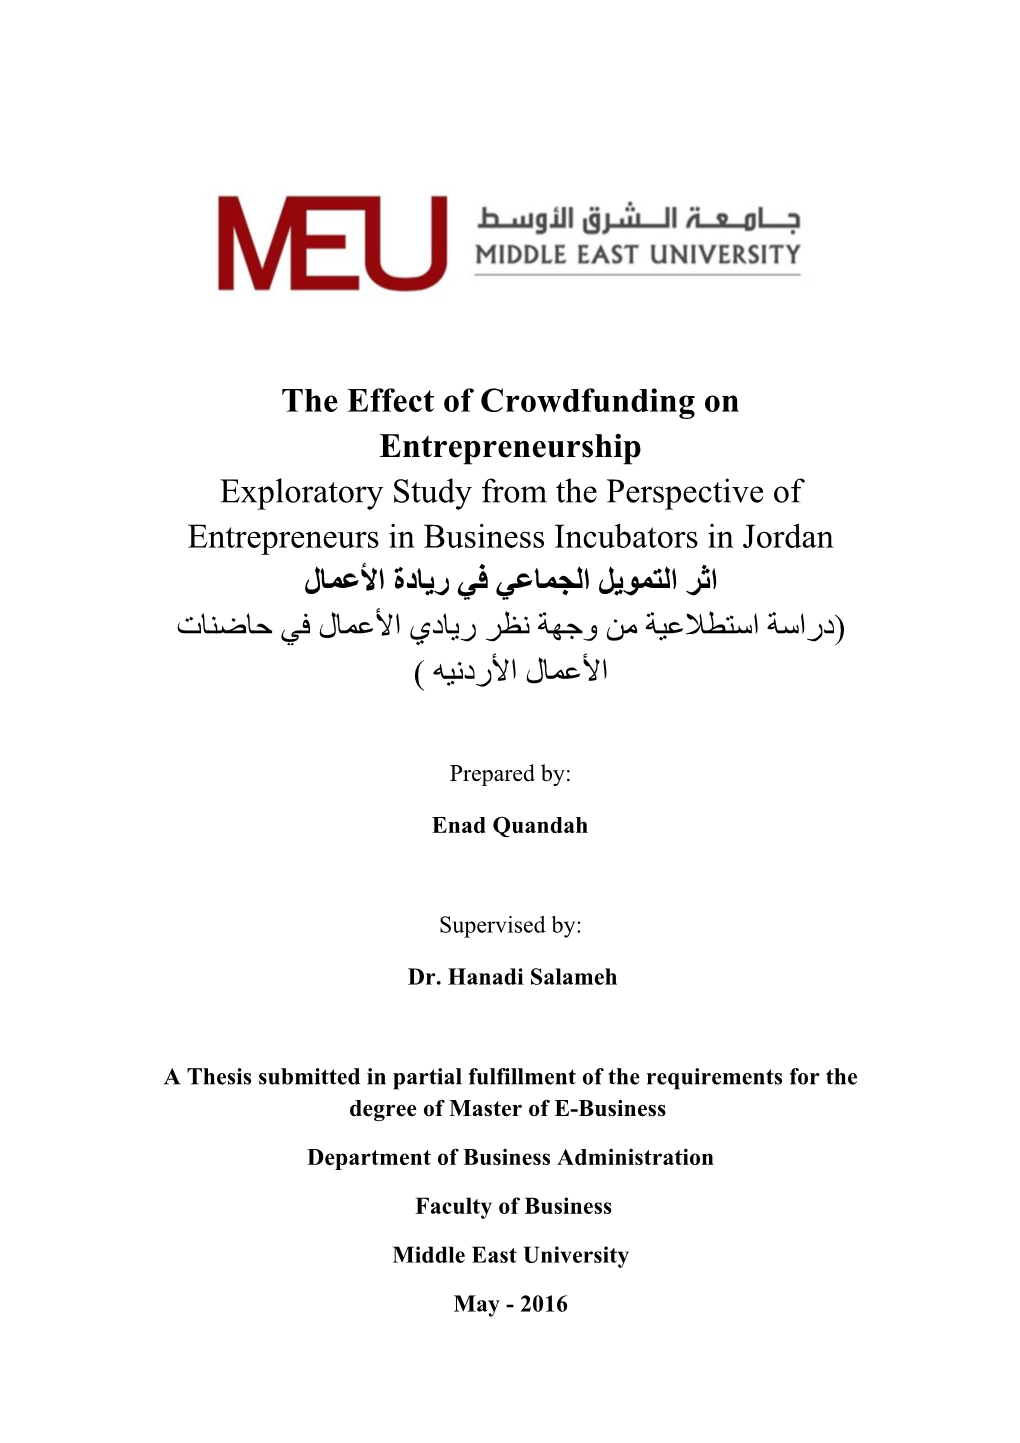 The Effect of Crowdfunding on Entrepreneurship Exploratory Study from the Perspective of Entrepreneurs in Business Incubators I